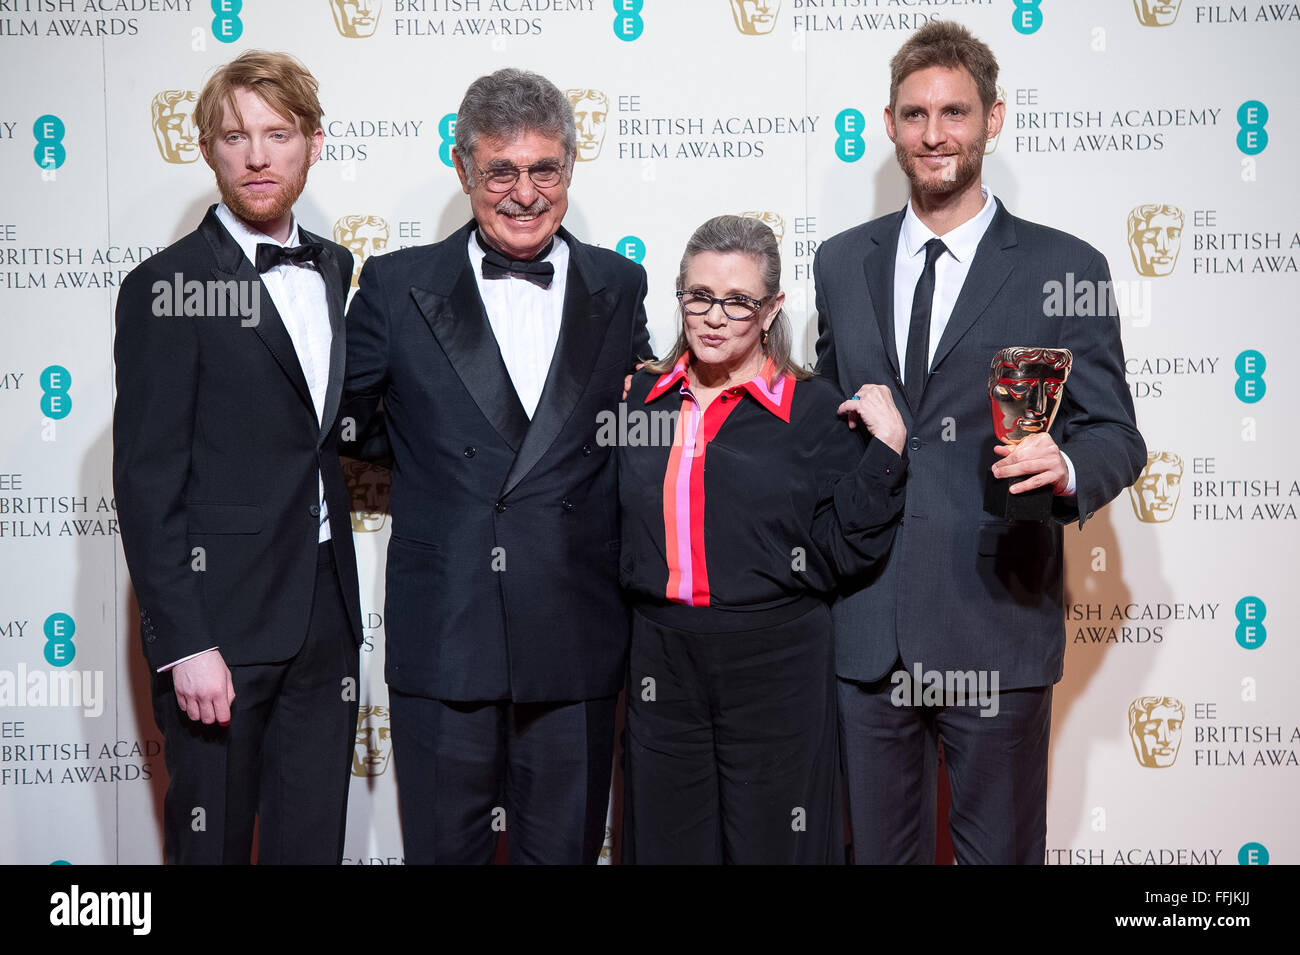 London, UK. 14th February, 2016. Argentinian director Damian Szifron (r) poses with the award for a film not in the English language for 'Wild Tales' with Hugo Sigman (2l) and award presenters actor Domhnall Gleeson (l) and actress Carrie Fisher (2r) pose in the press room of the EE British Academy Film Awards, BAFTA Awards, at the Royal Opera House in London, England, on 14 February 2016. Credit:  dpa picture alliance/Alamy Live News Stock Photo